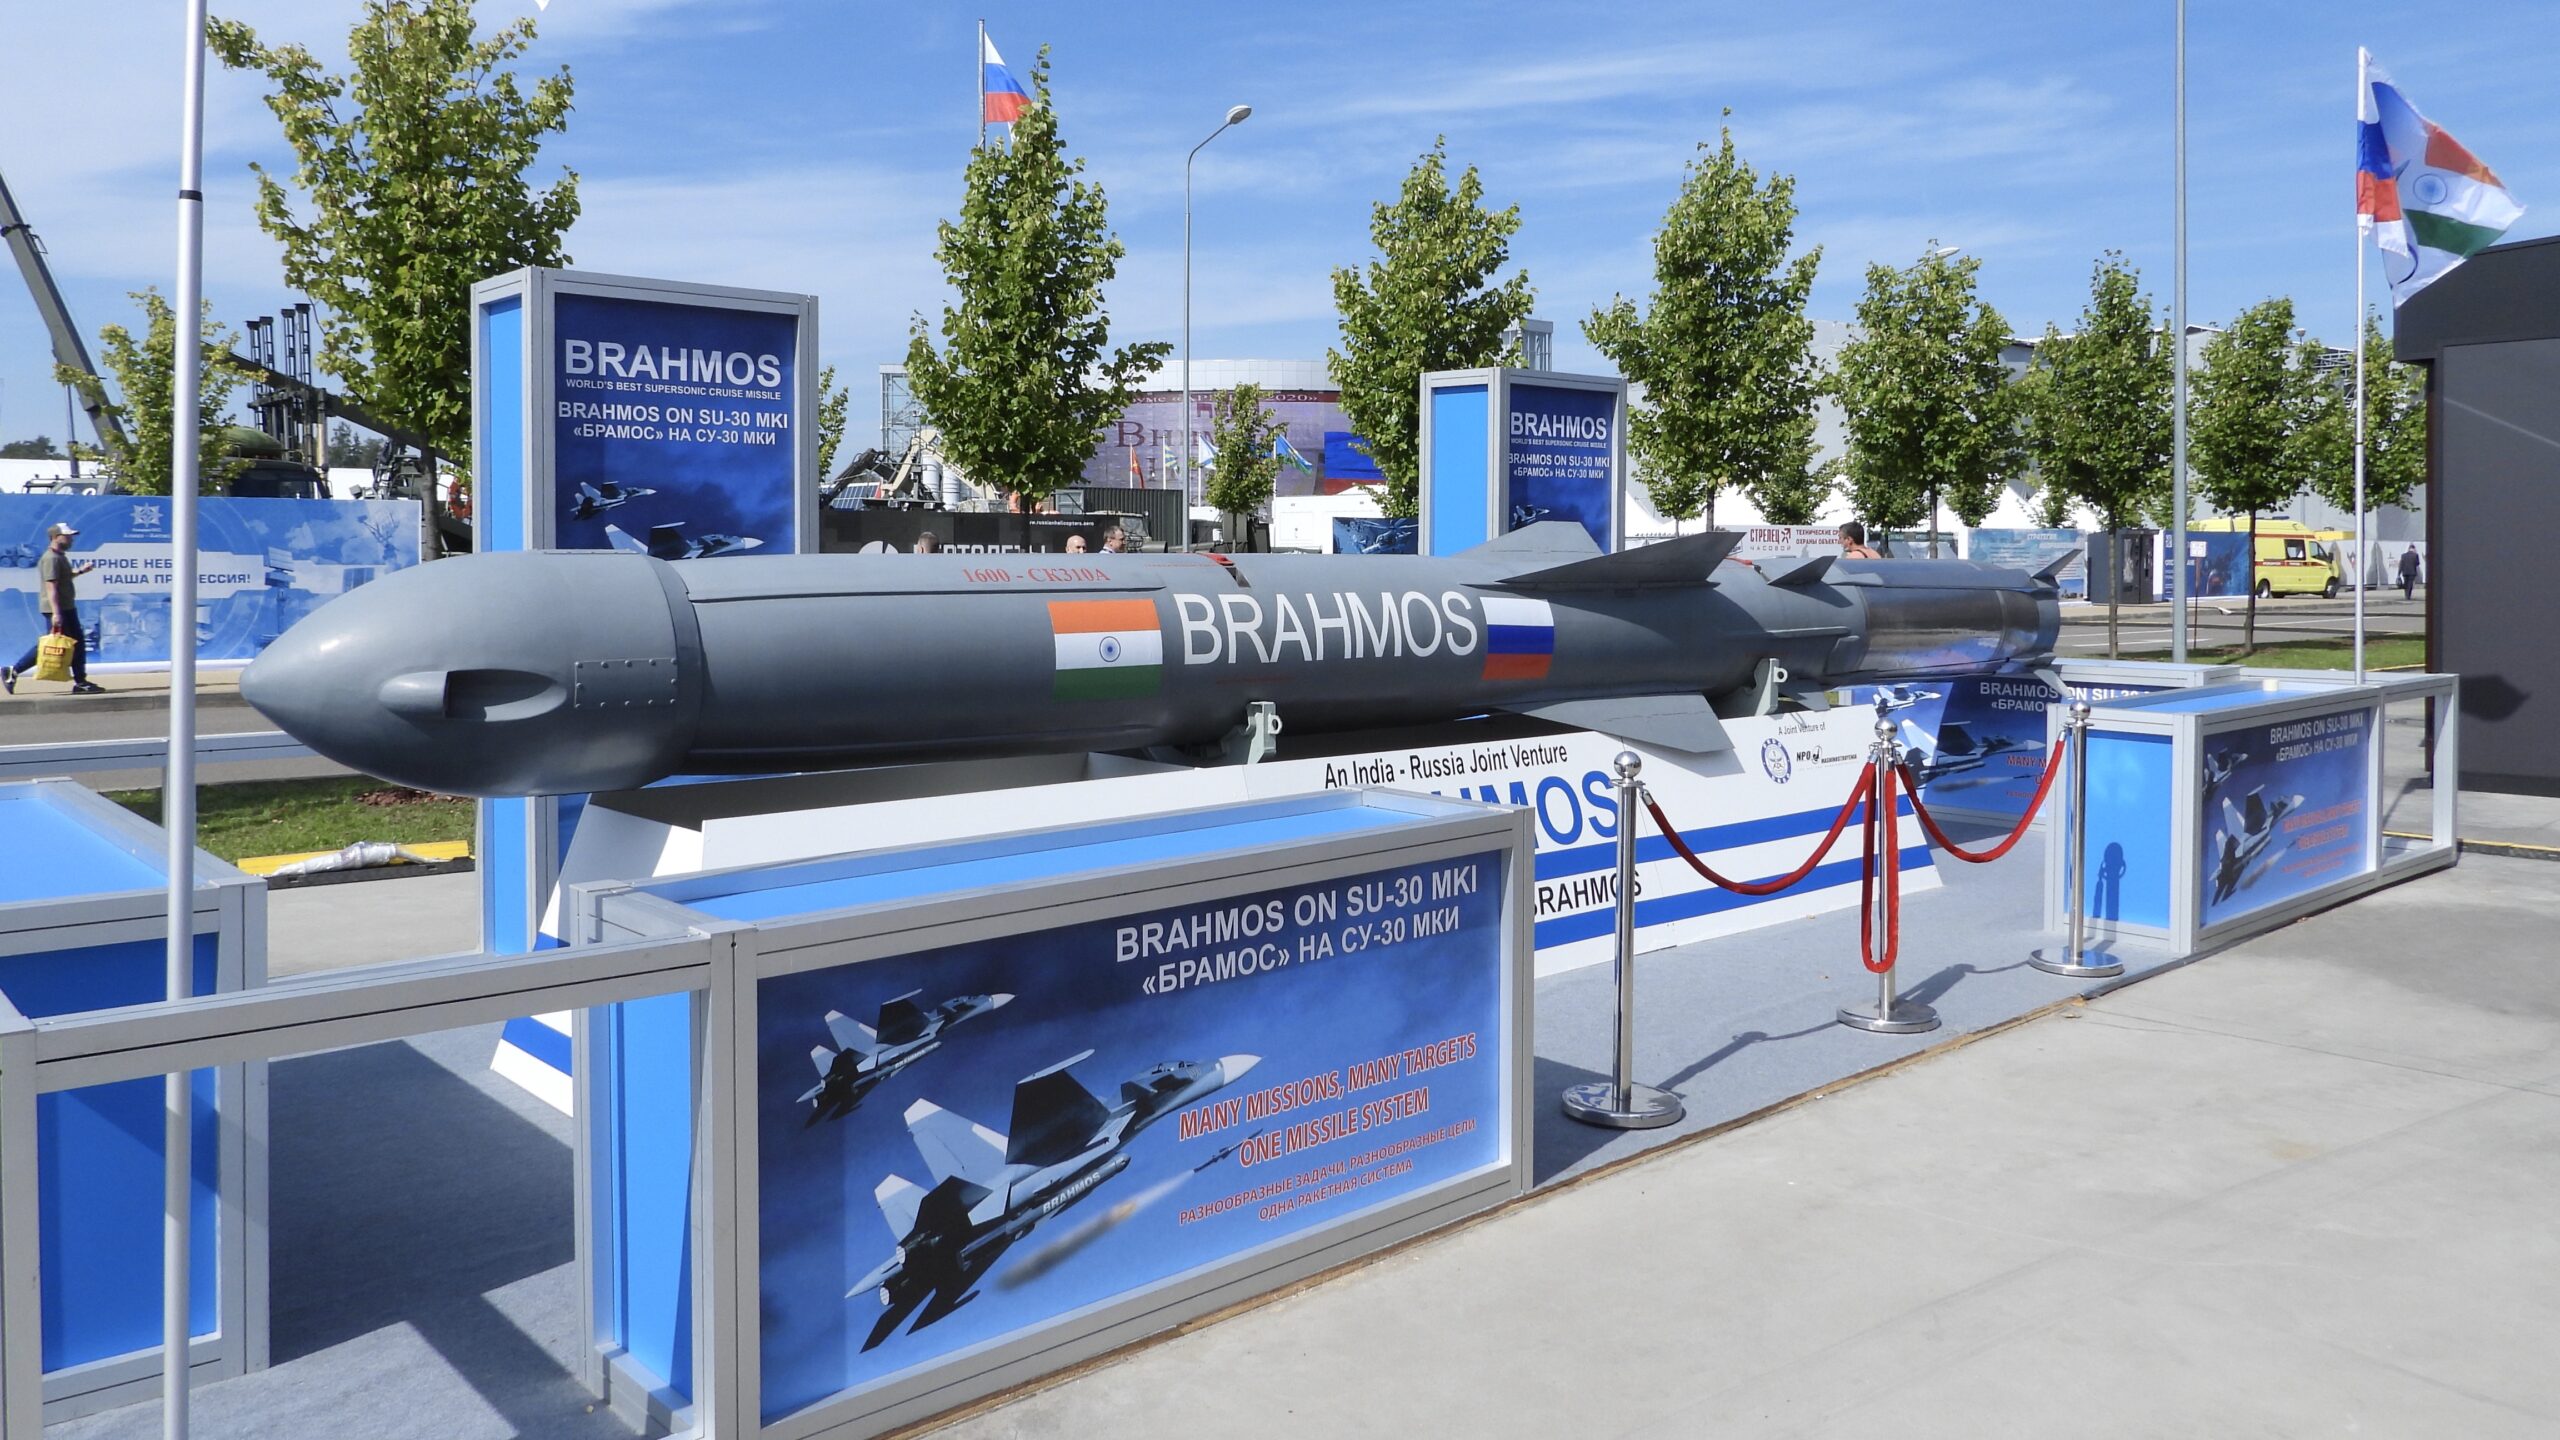 Indonesia Nearing The Purchase Of Brahmos Missiles: Report